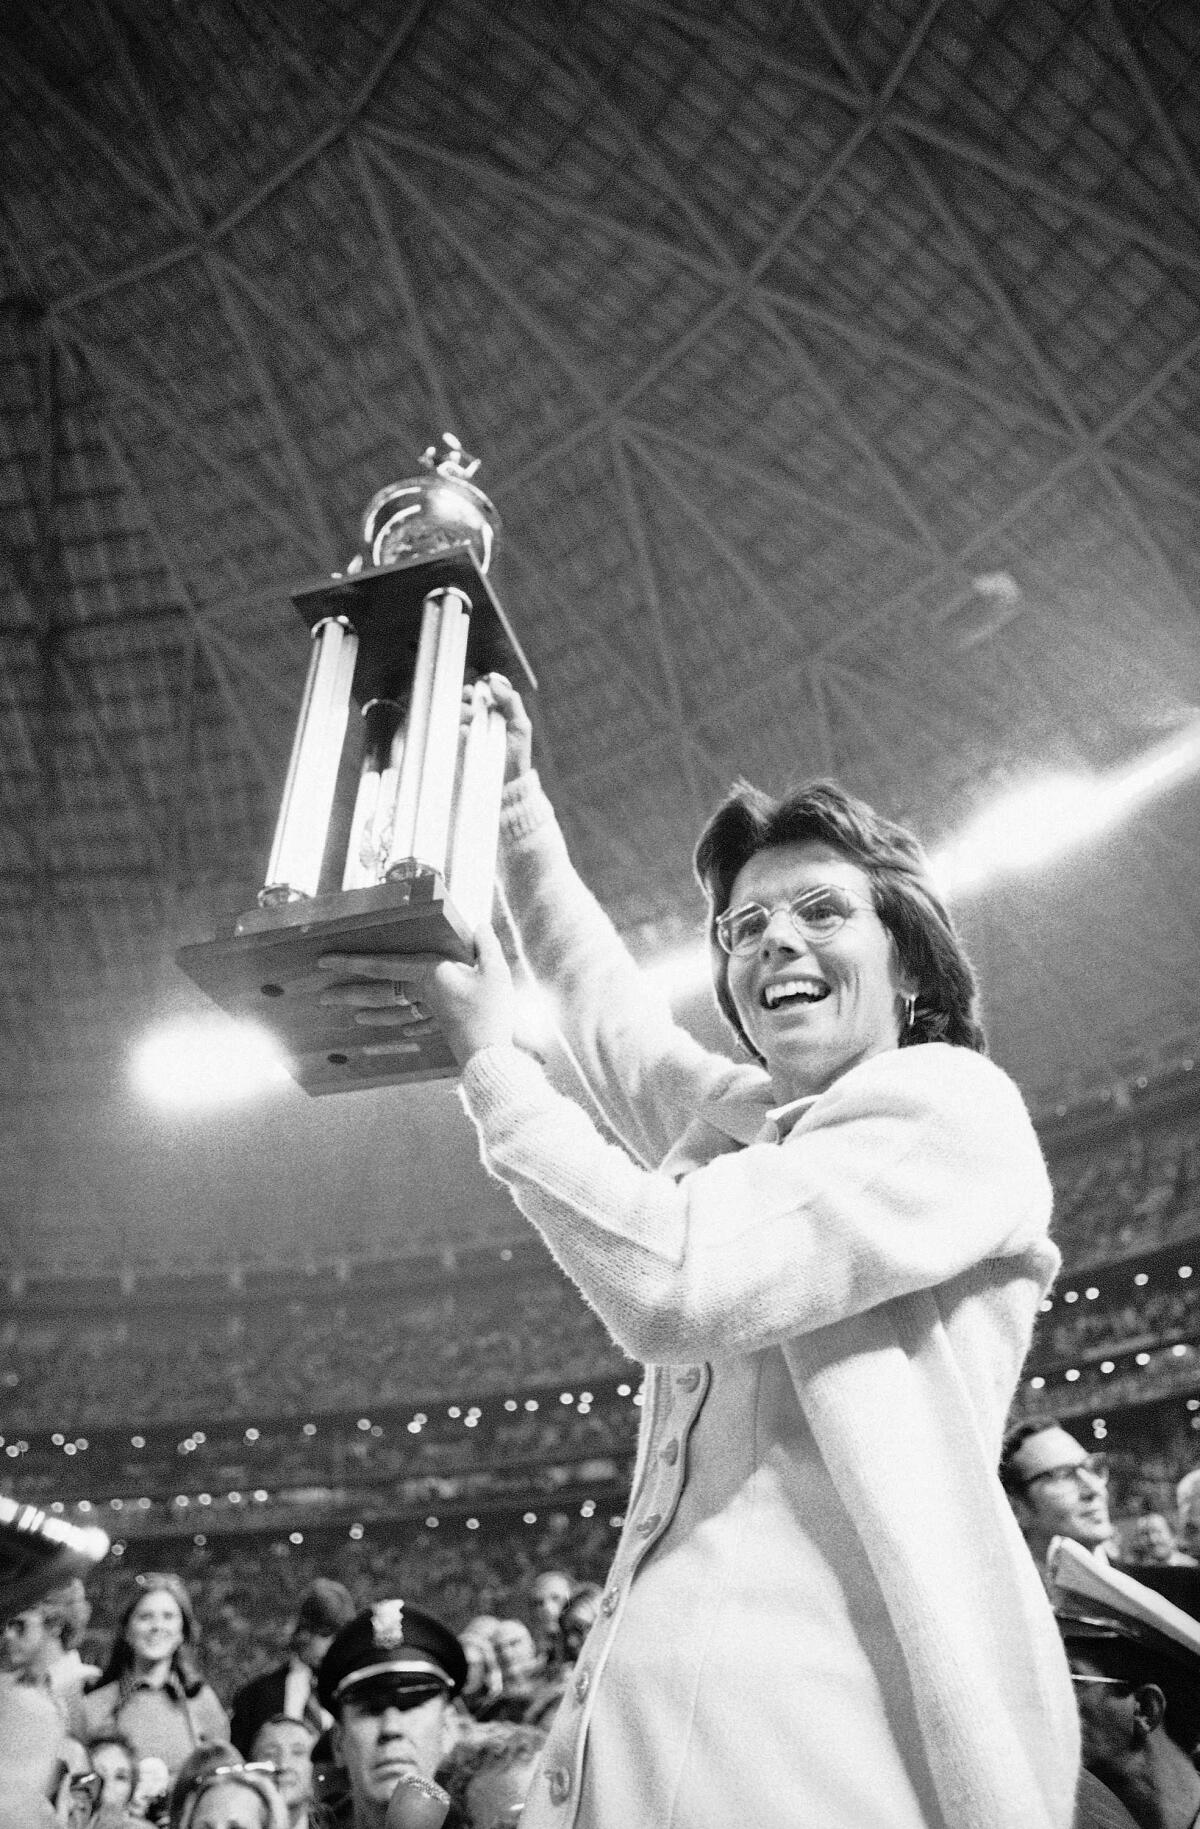 Billie Jean King holds up the winner's trophy after defeating Bobby Riggs at the Astrodome in Houston.